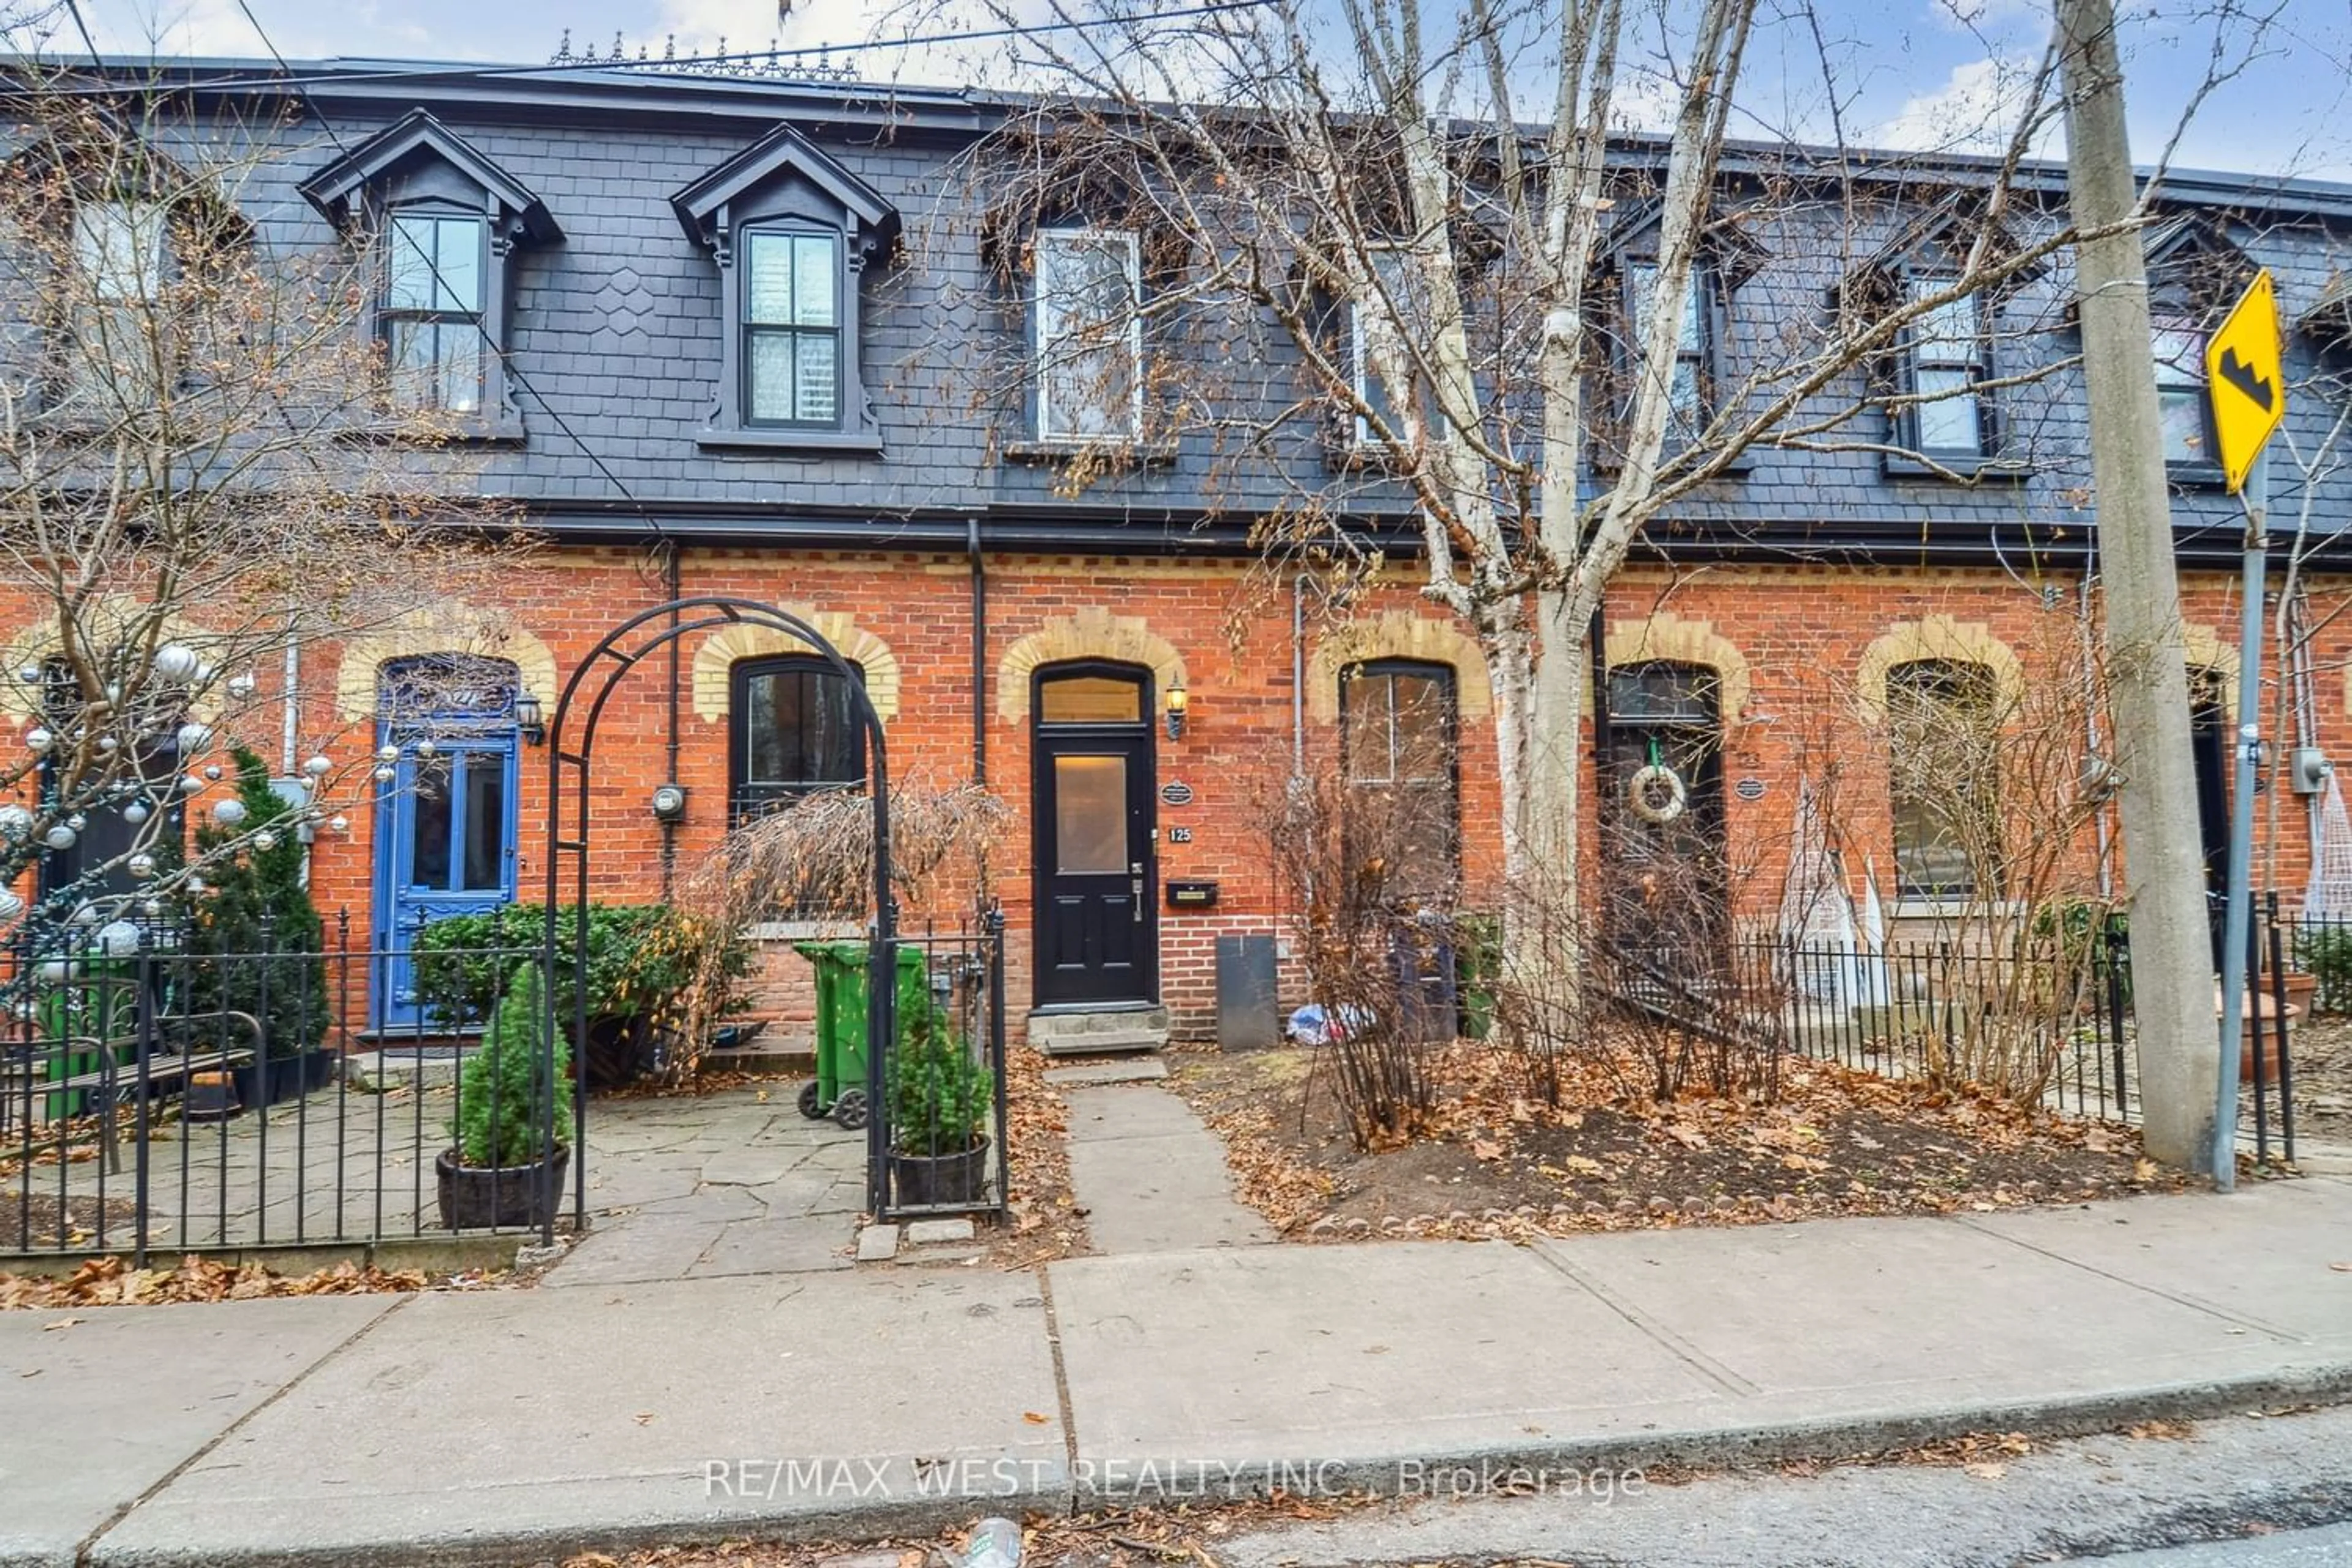 Home with brick exterior material for 125 Spruce St, Toronto Ontario M5A 2J4